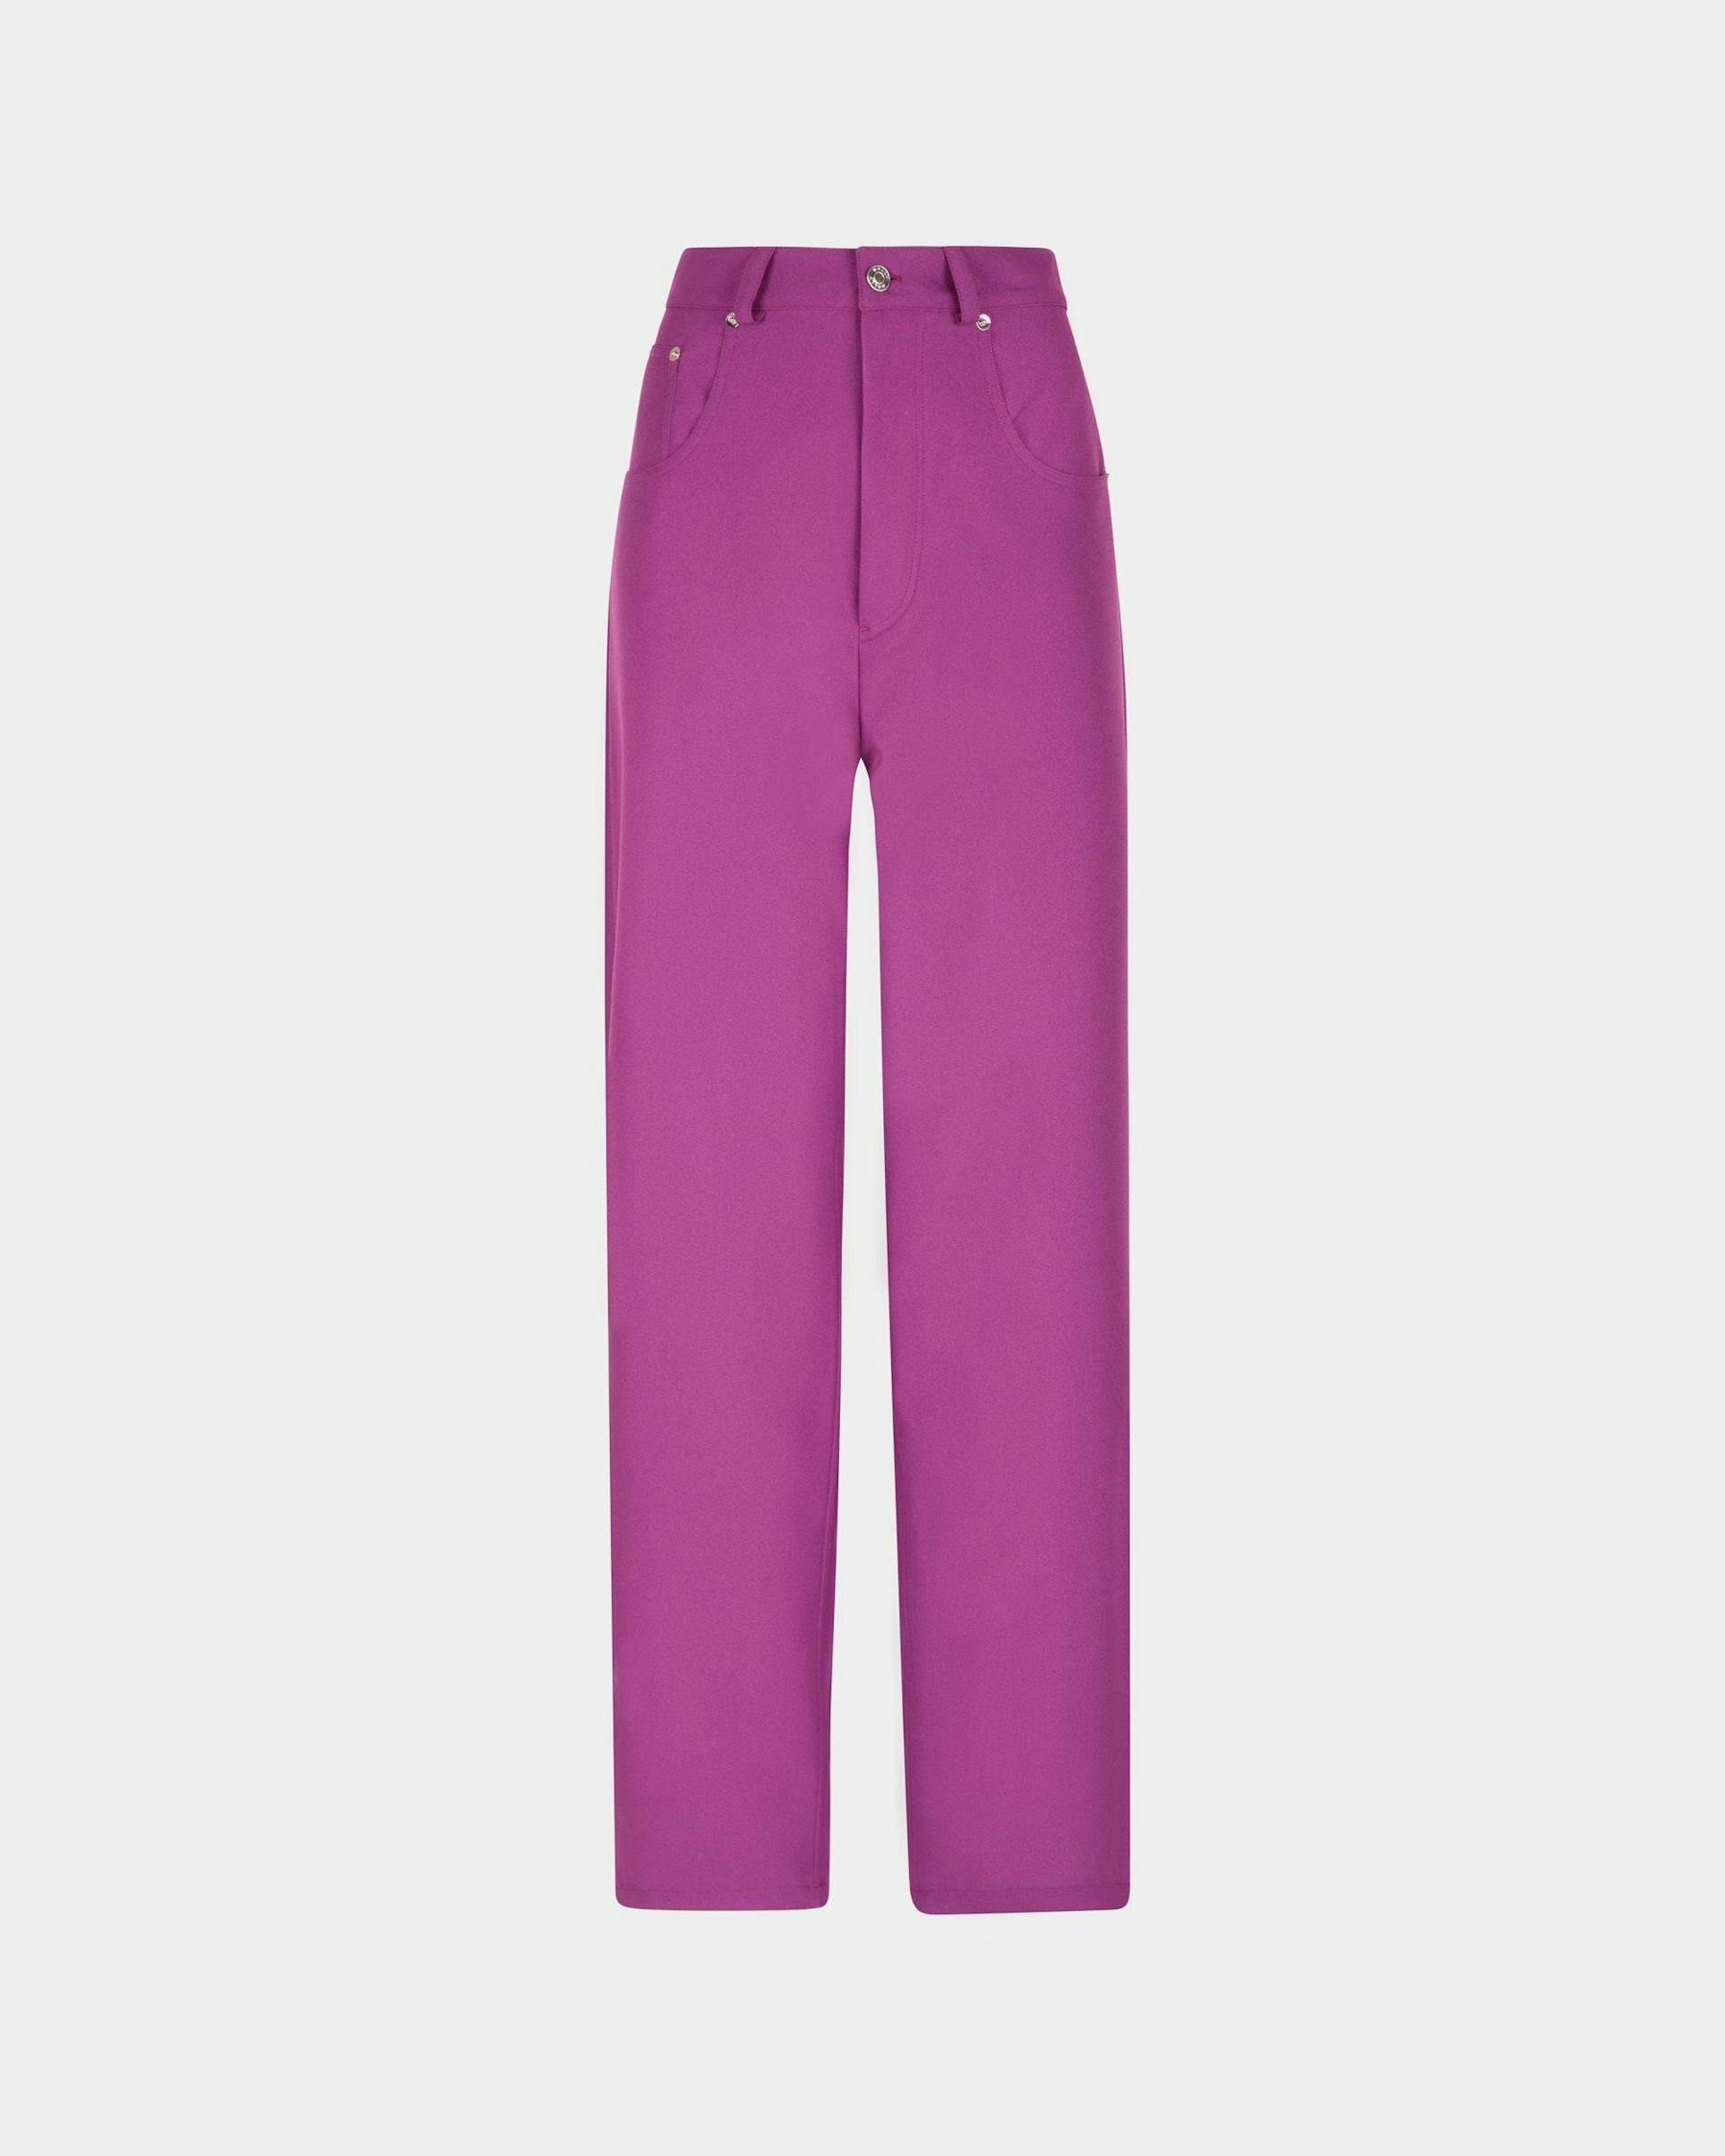 Women's High Waisted Pants In Pink | Bally | Still Life Front